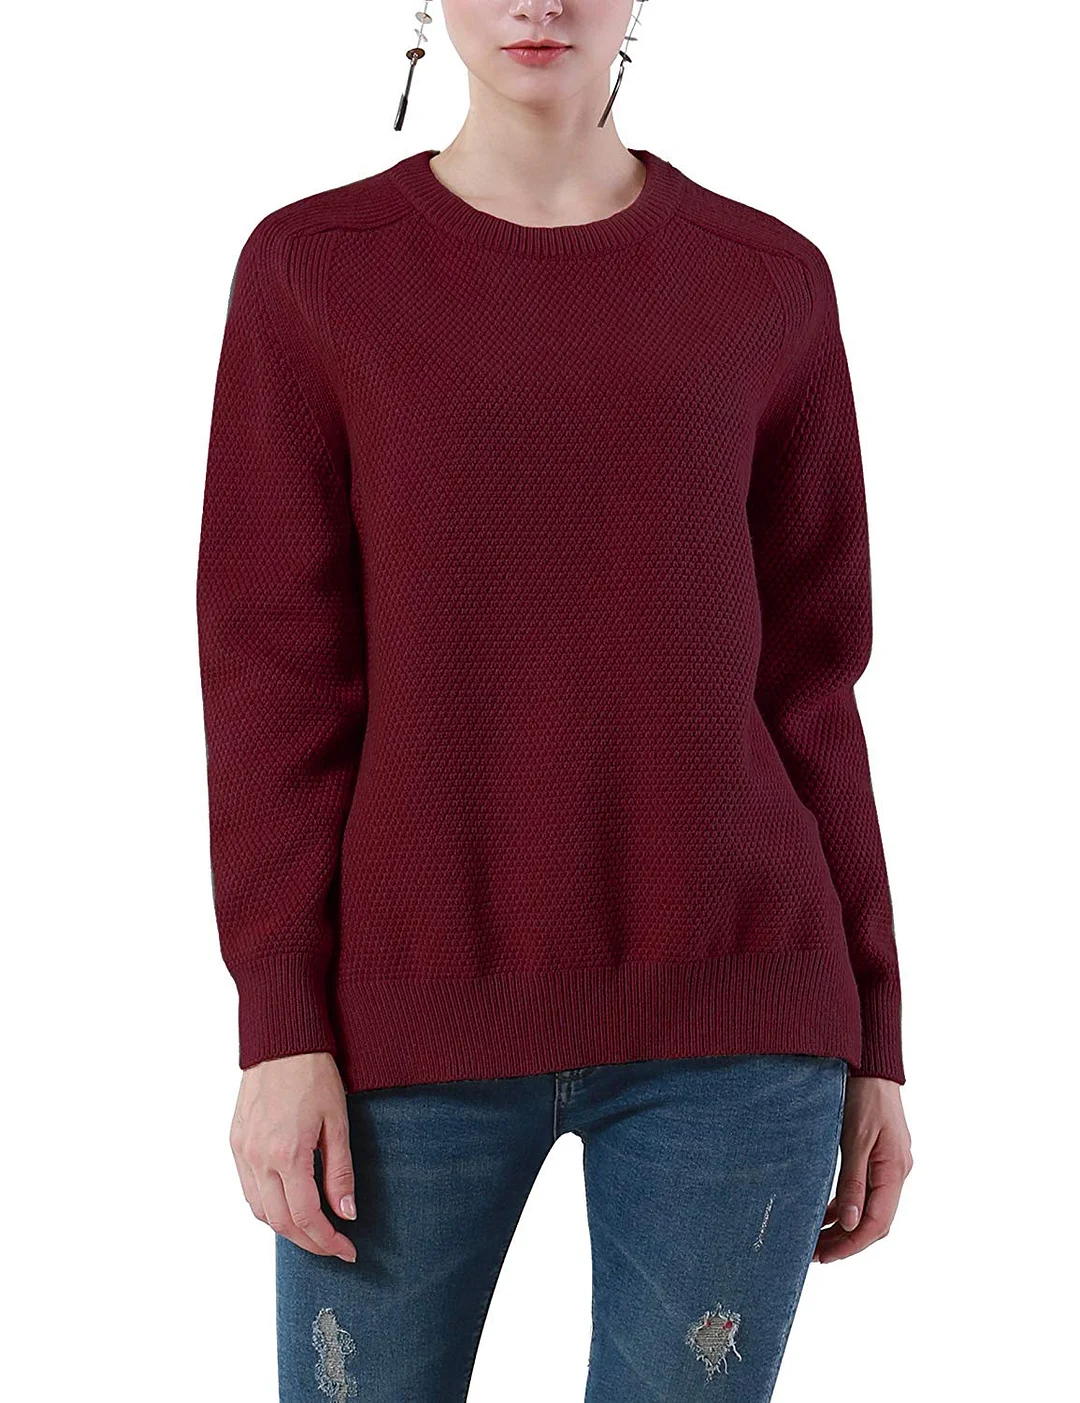 Women's Sweater Split Hi-Low Hem Cable Knitted Pullover Tops